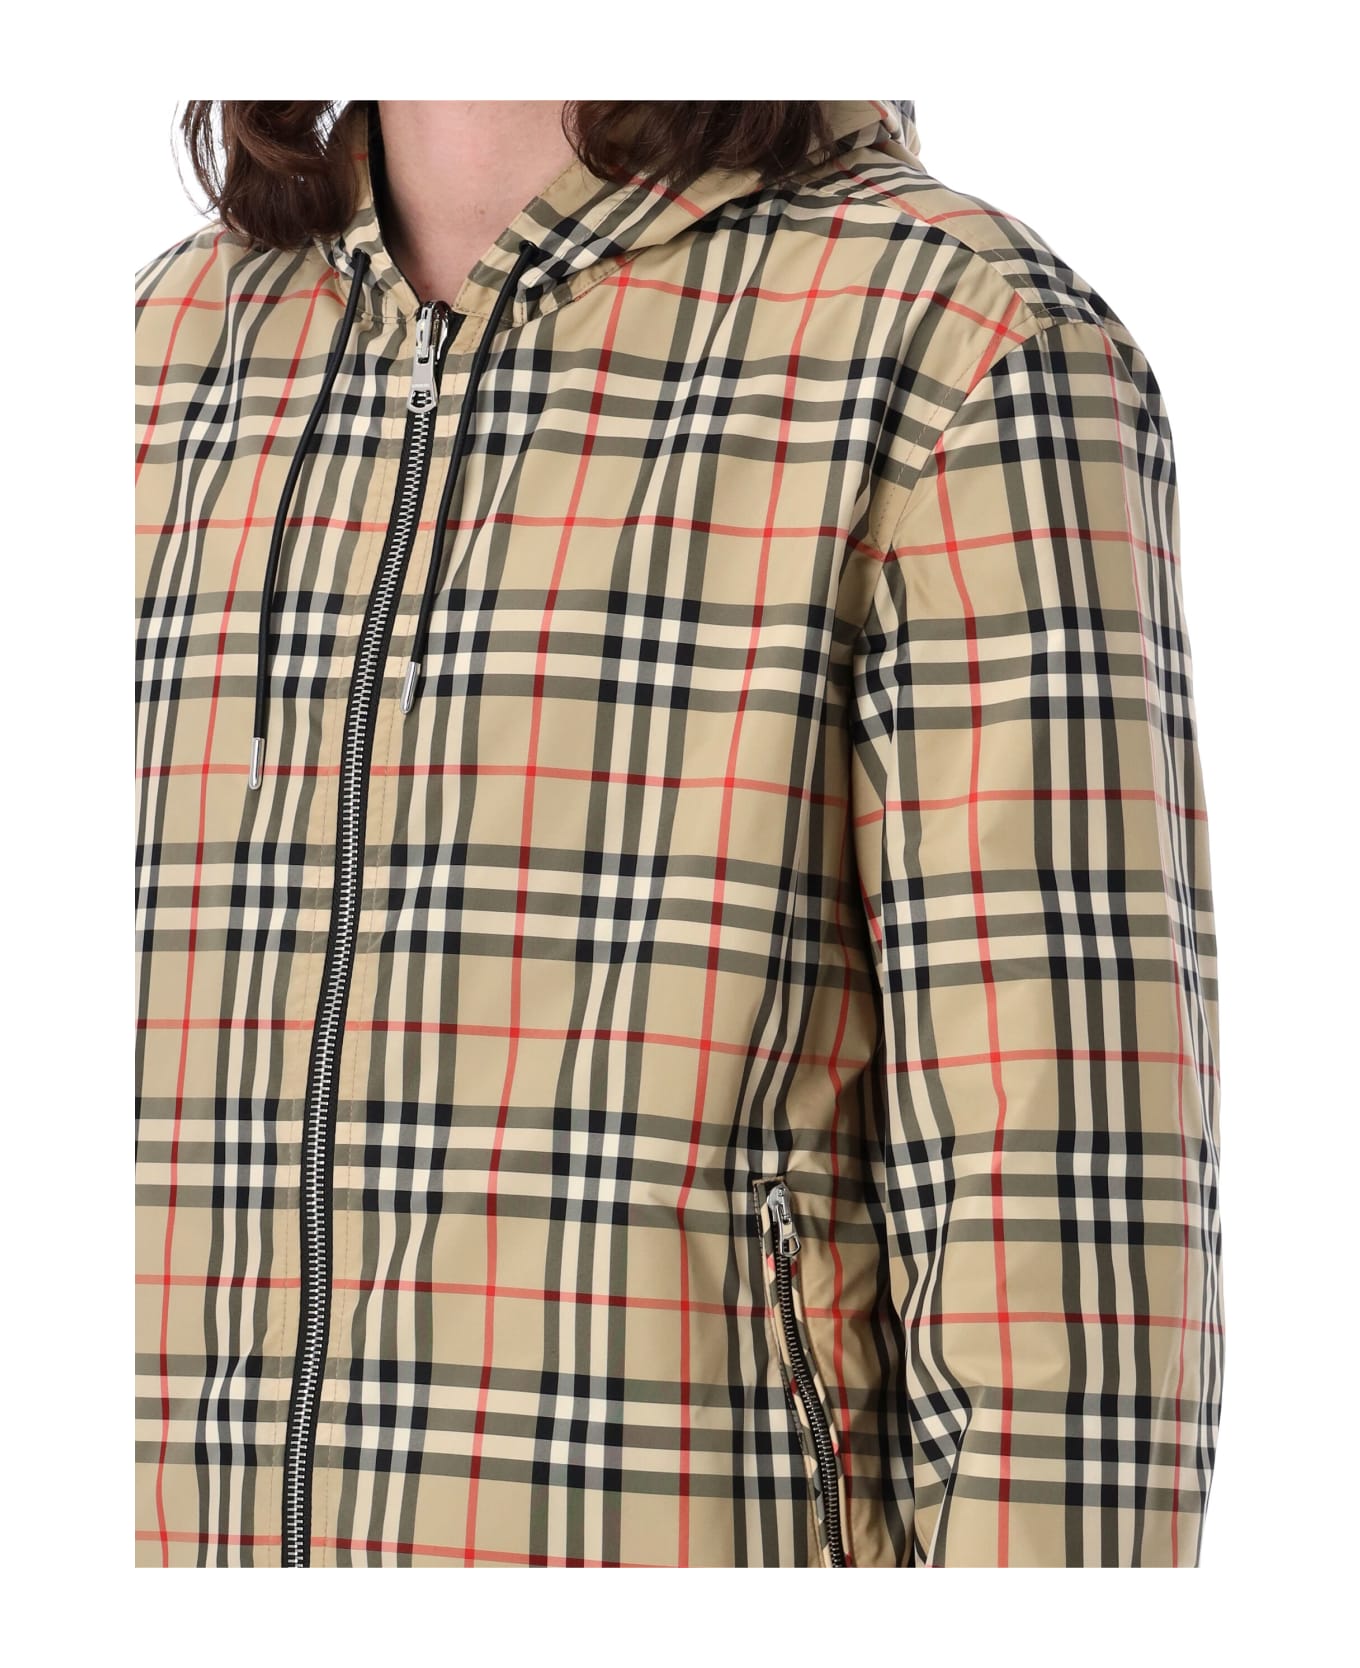 Burberry London Reversible Check Jacket - ARCHIVE BEIGE IP CHK ブレザー